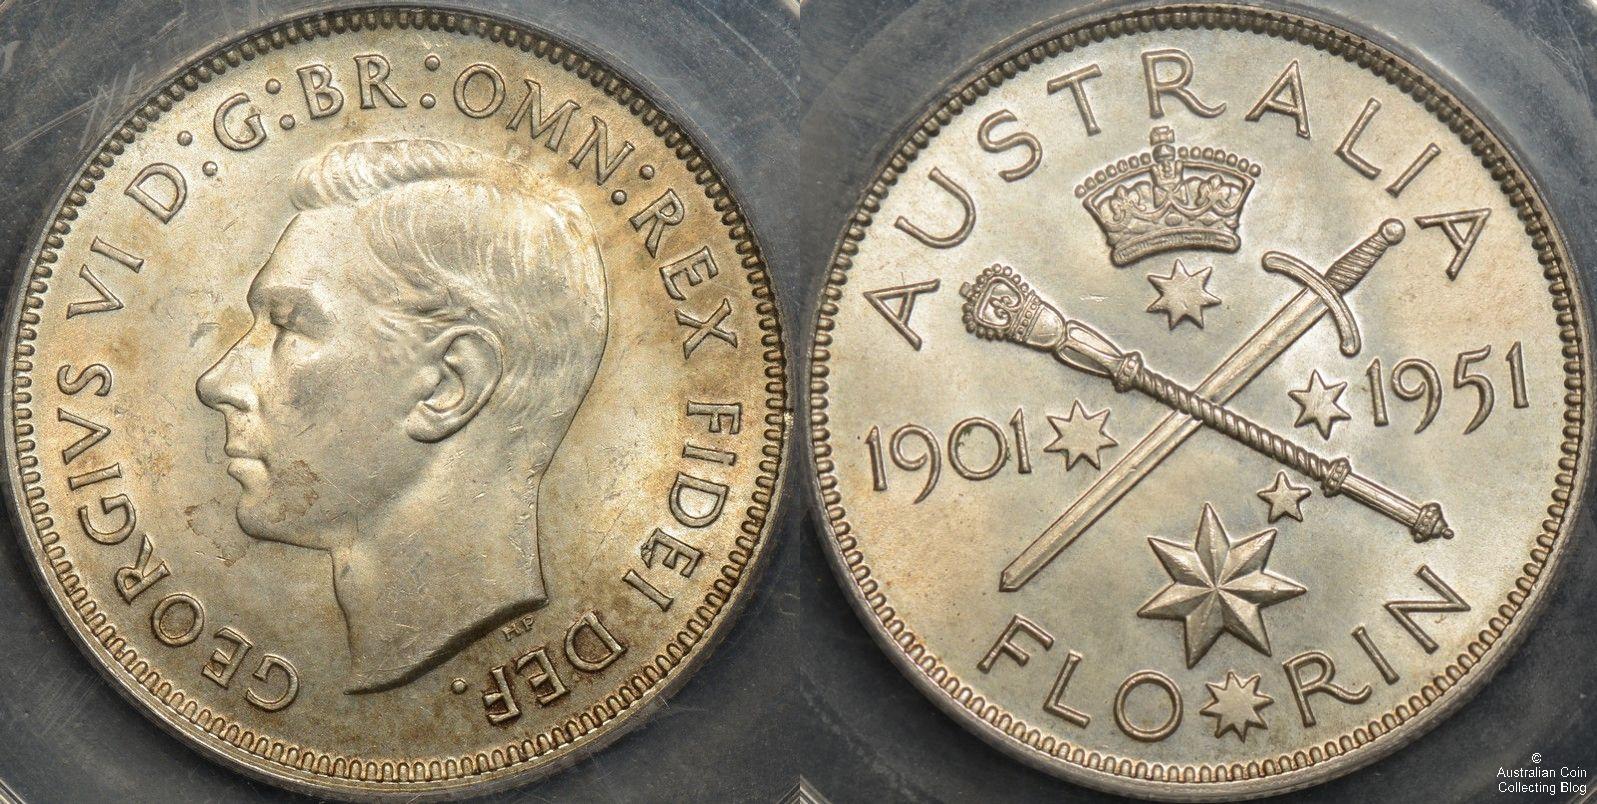 1951 Federation Florin with portrait of King George VI